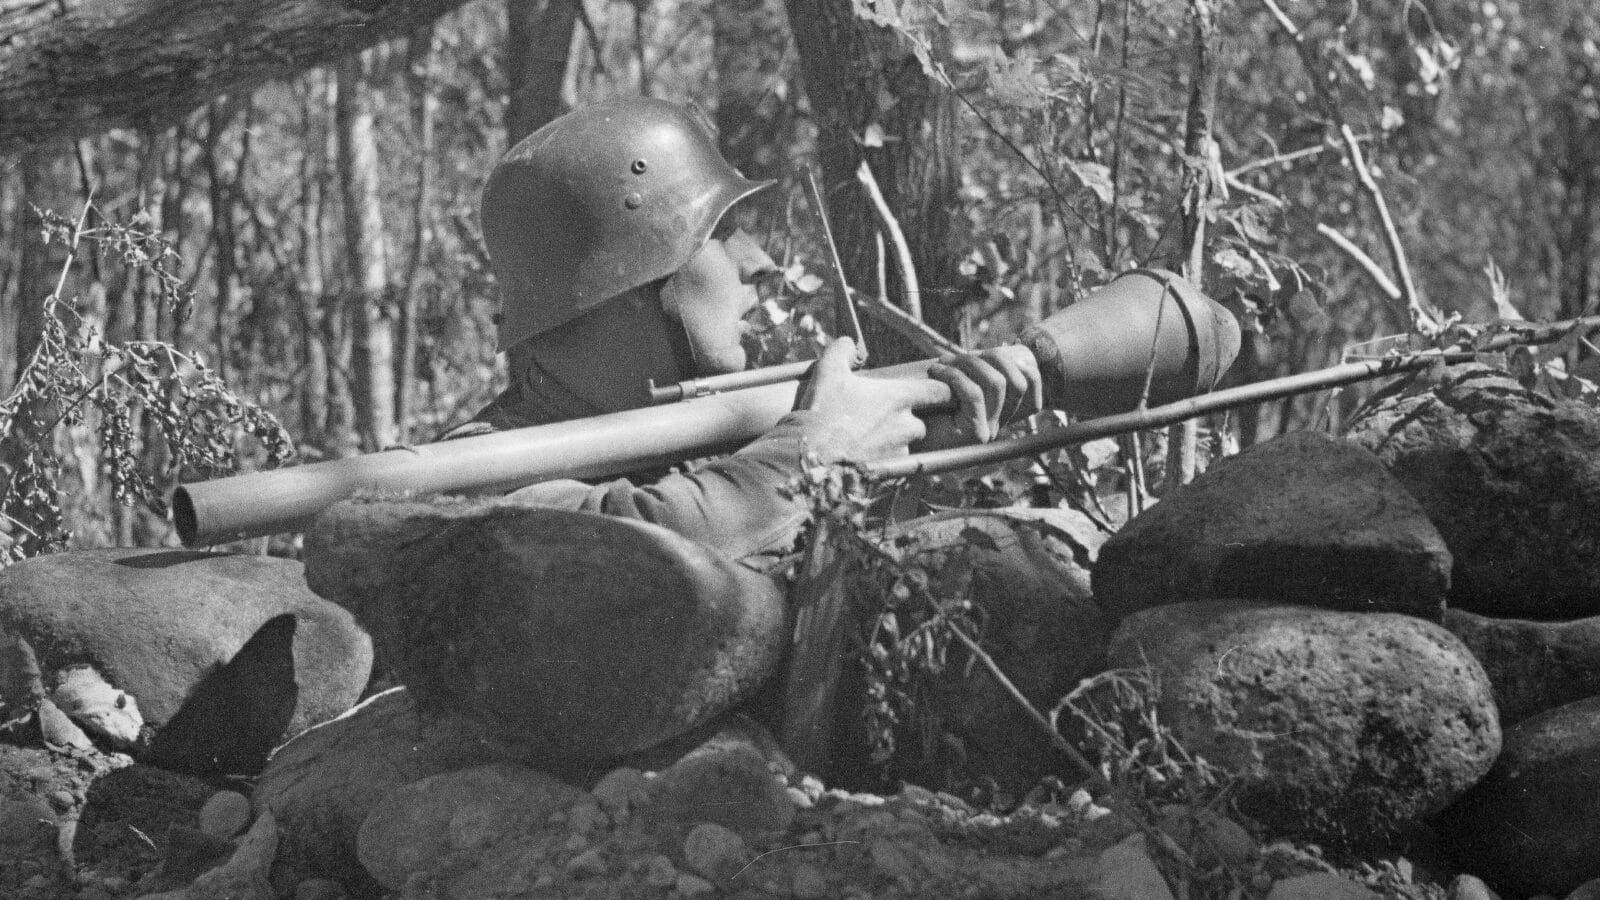 Panzerfaust — The Story of Germany’s “Tank Fist” - The Armory Life